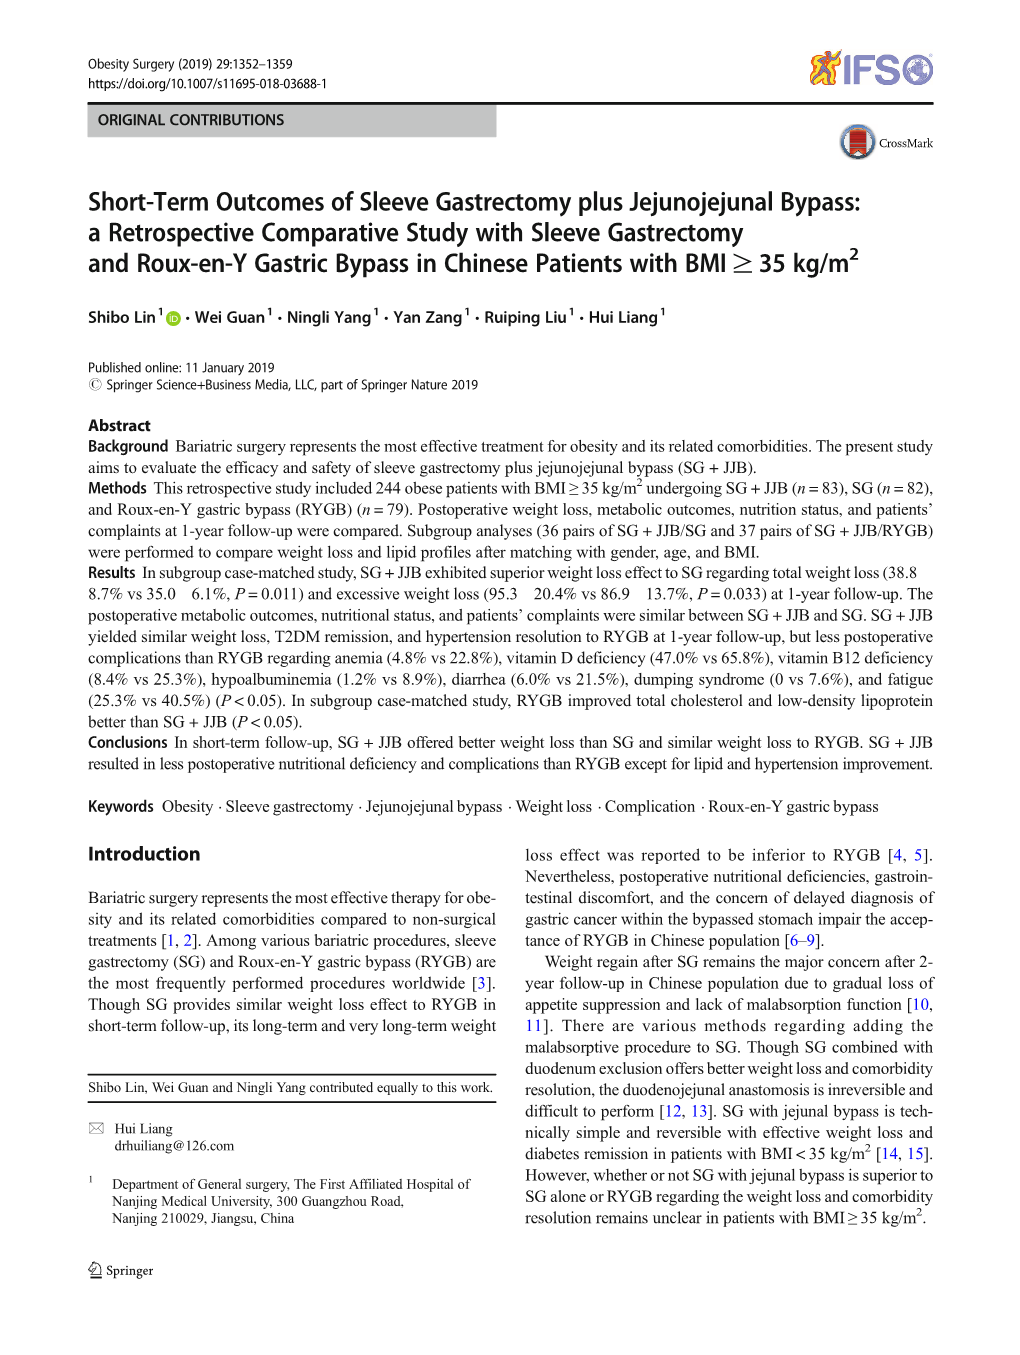 Short-Term Outcomes of Sleeve Gastrectomy Plus Jejunojejunal